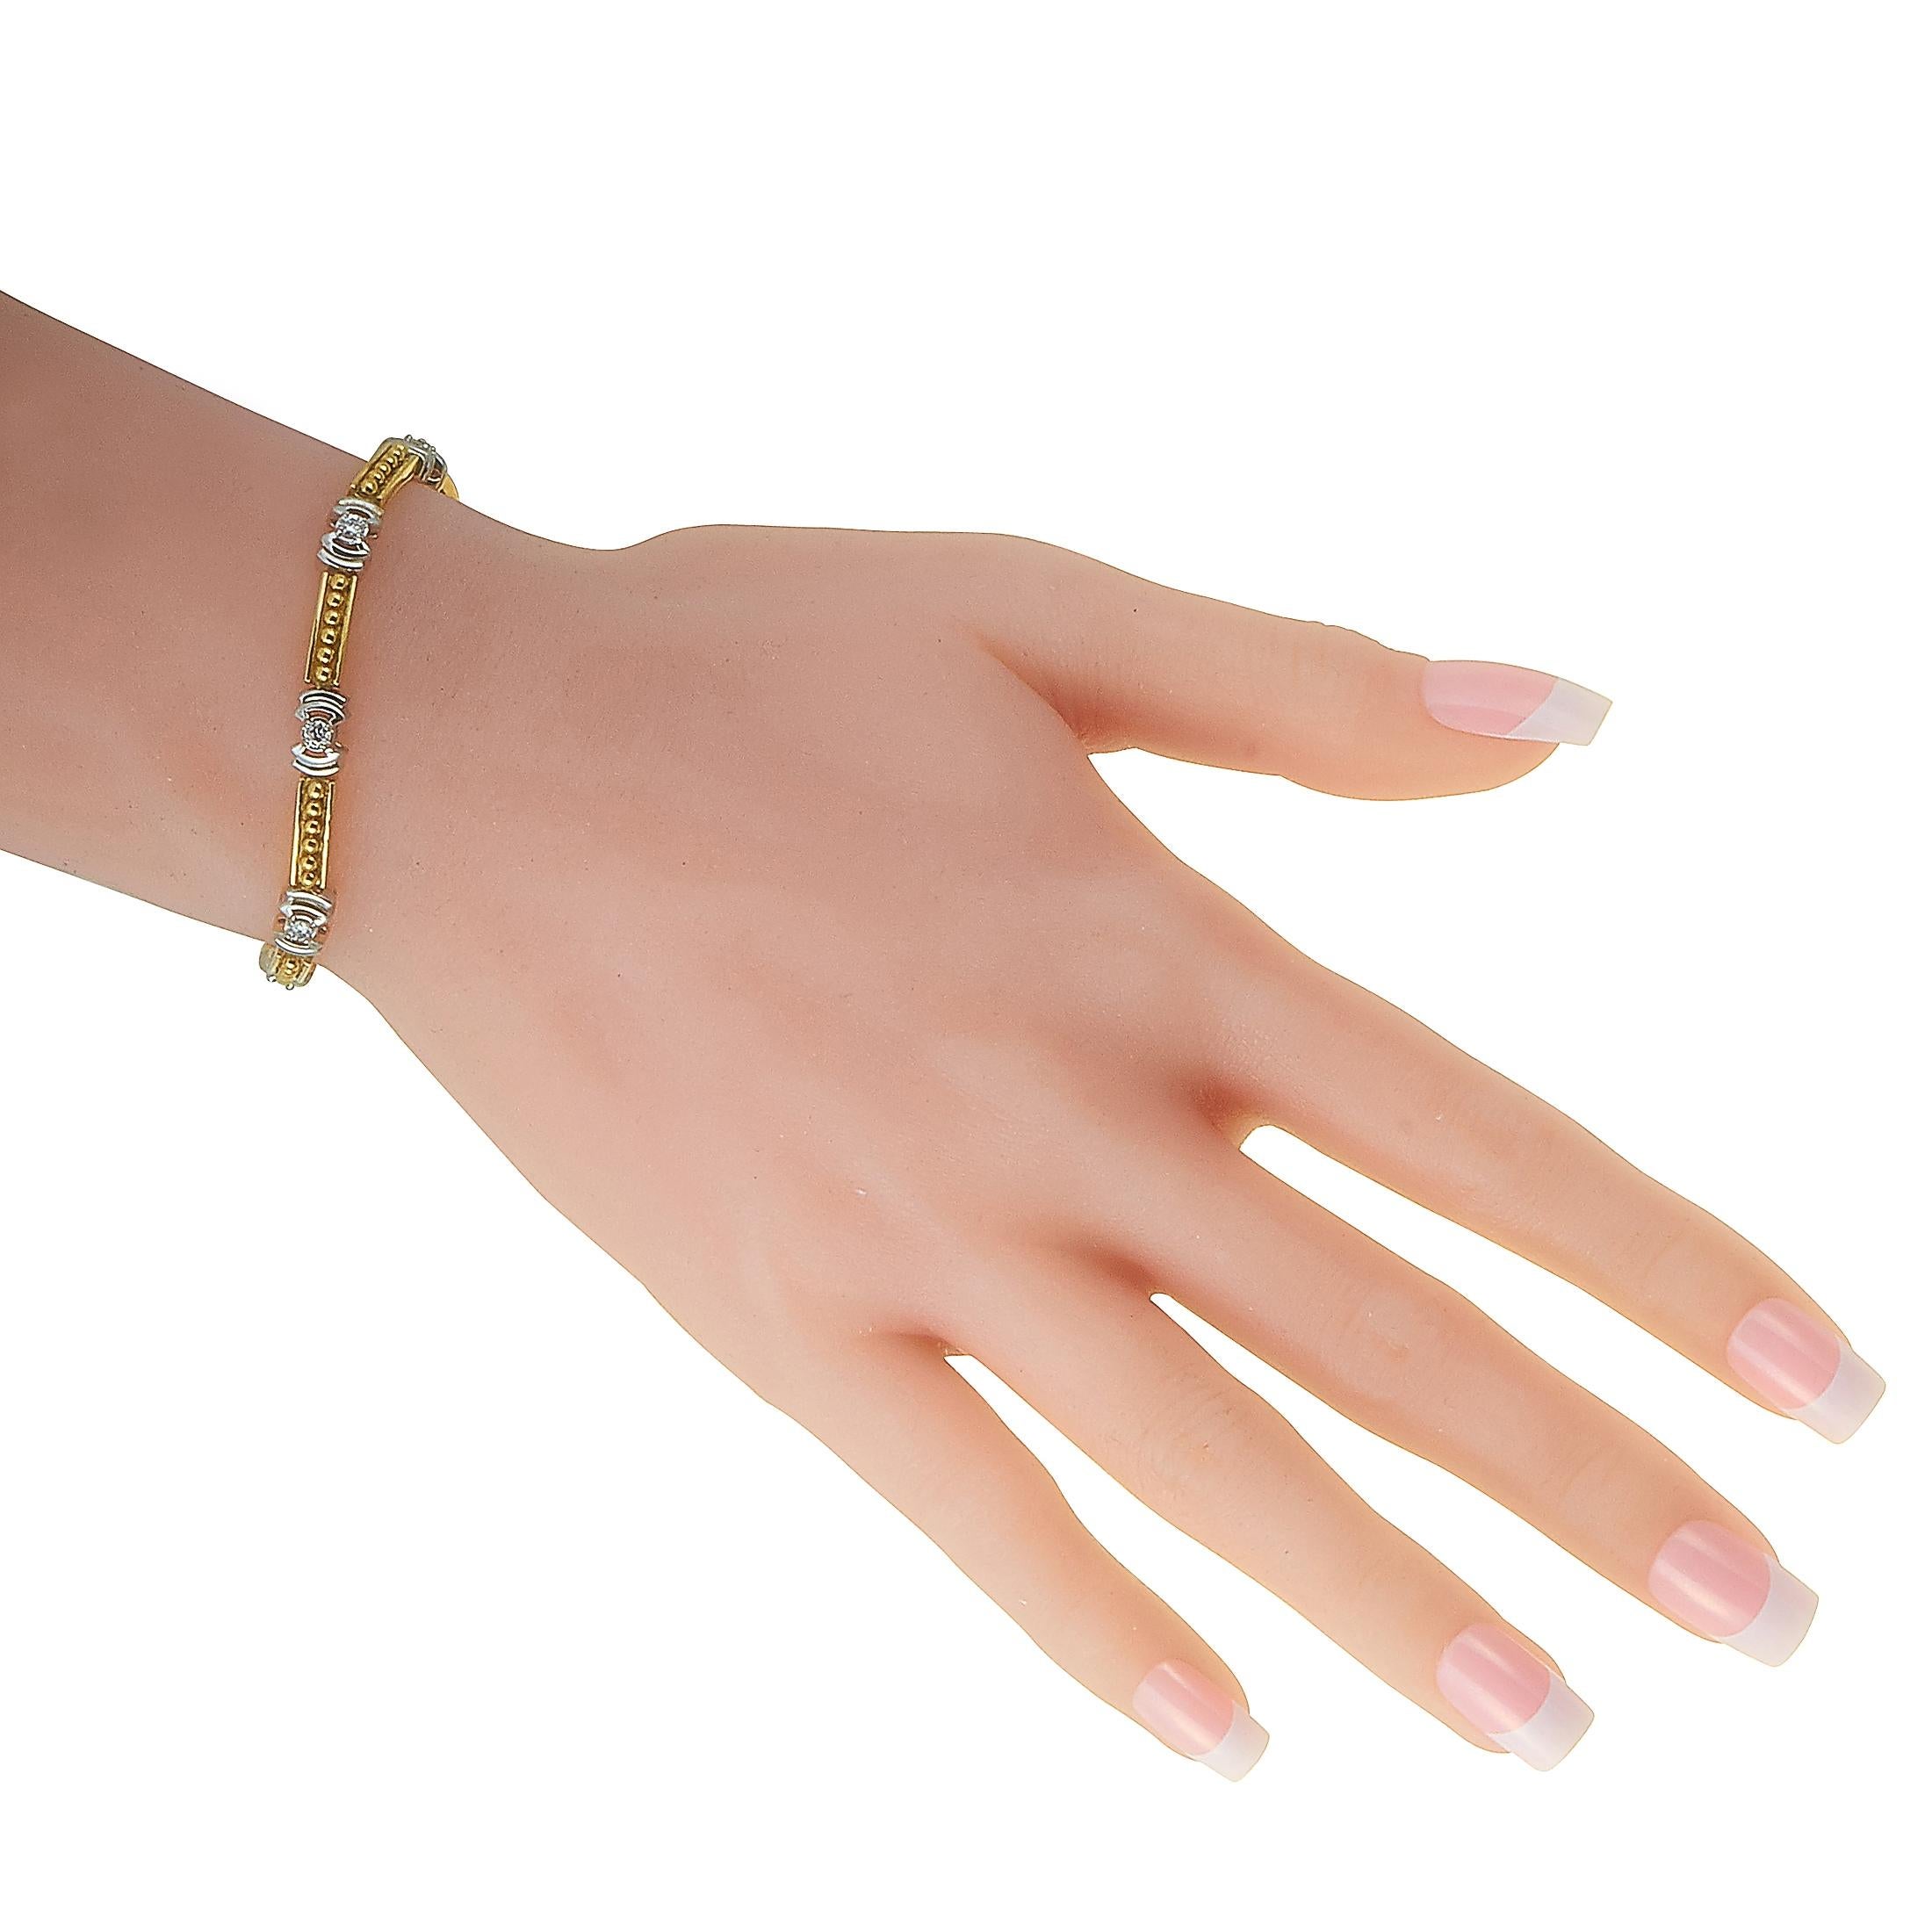 This LB Exclusive bracelet is made of 18K yellow and white gold and weighs 23.5 grams, measuring 7.50” in length. The bracelet is set with diamonds that amount to 1.00 carat.
 
Offered in brand new condition, this item includes a gift box.
